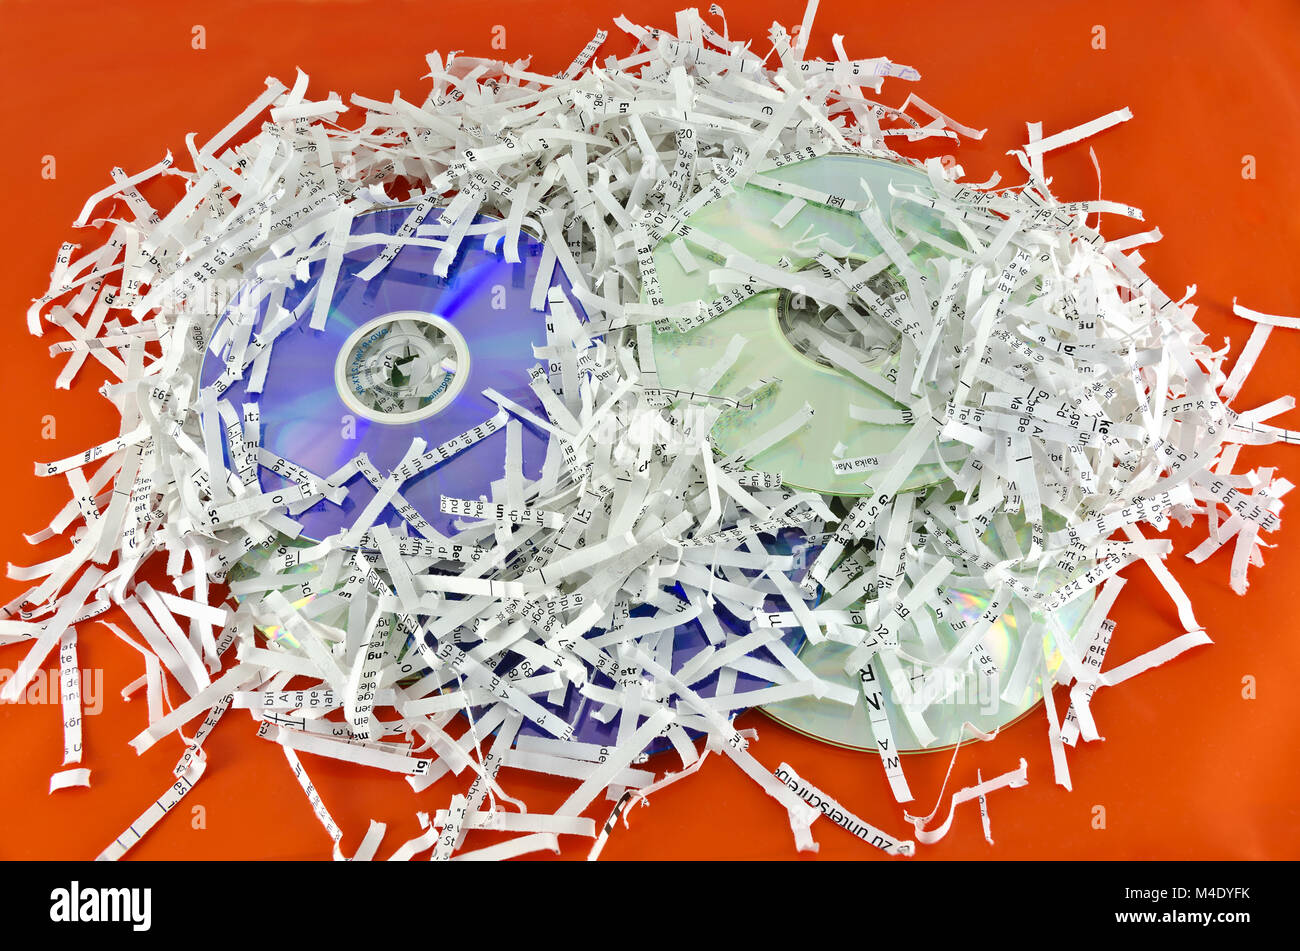 storage discs and shredded paper sheets Stock Photo